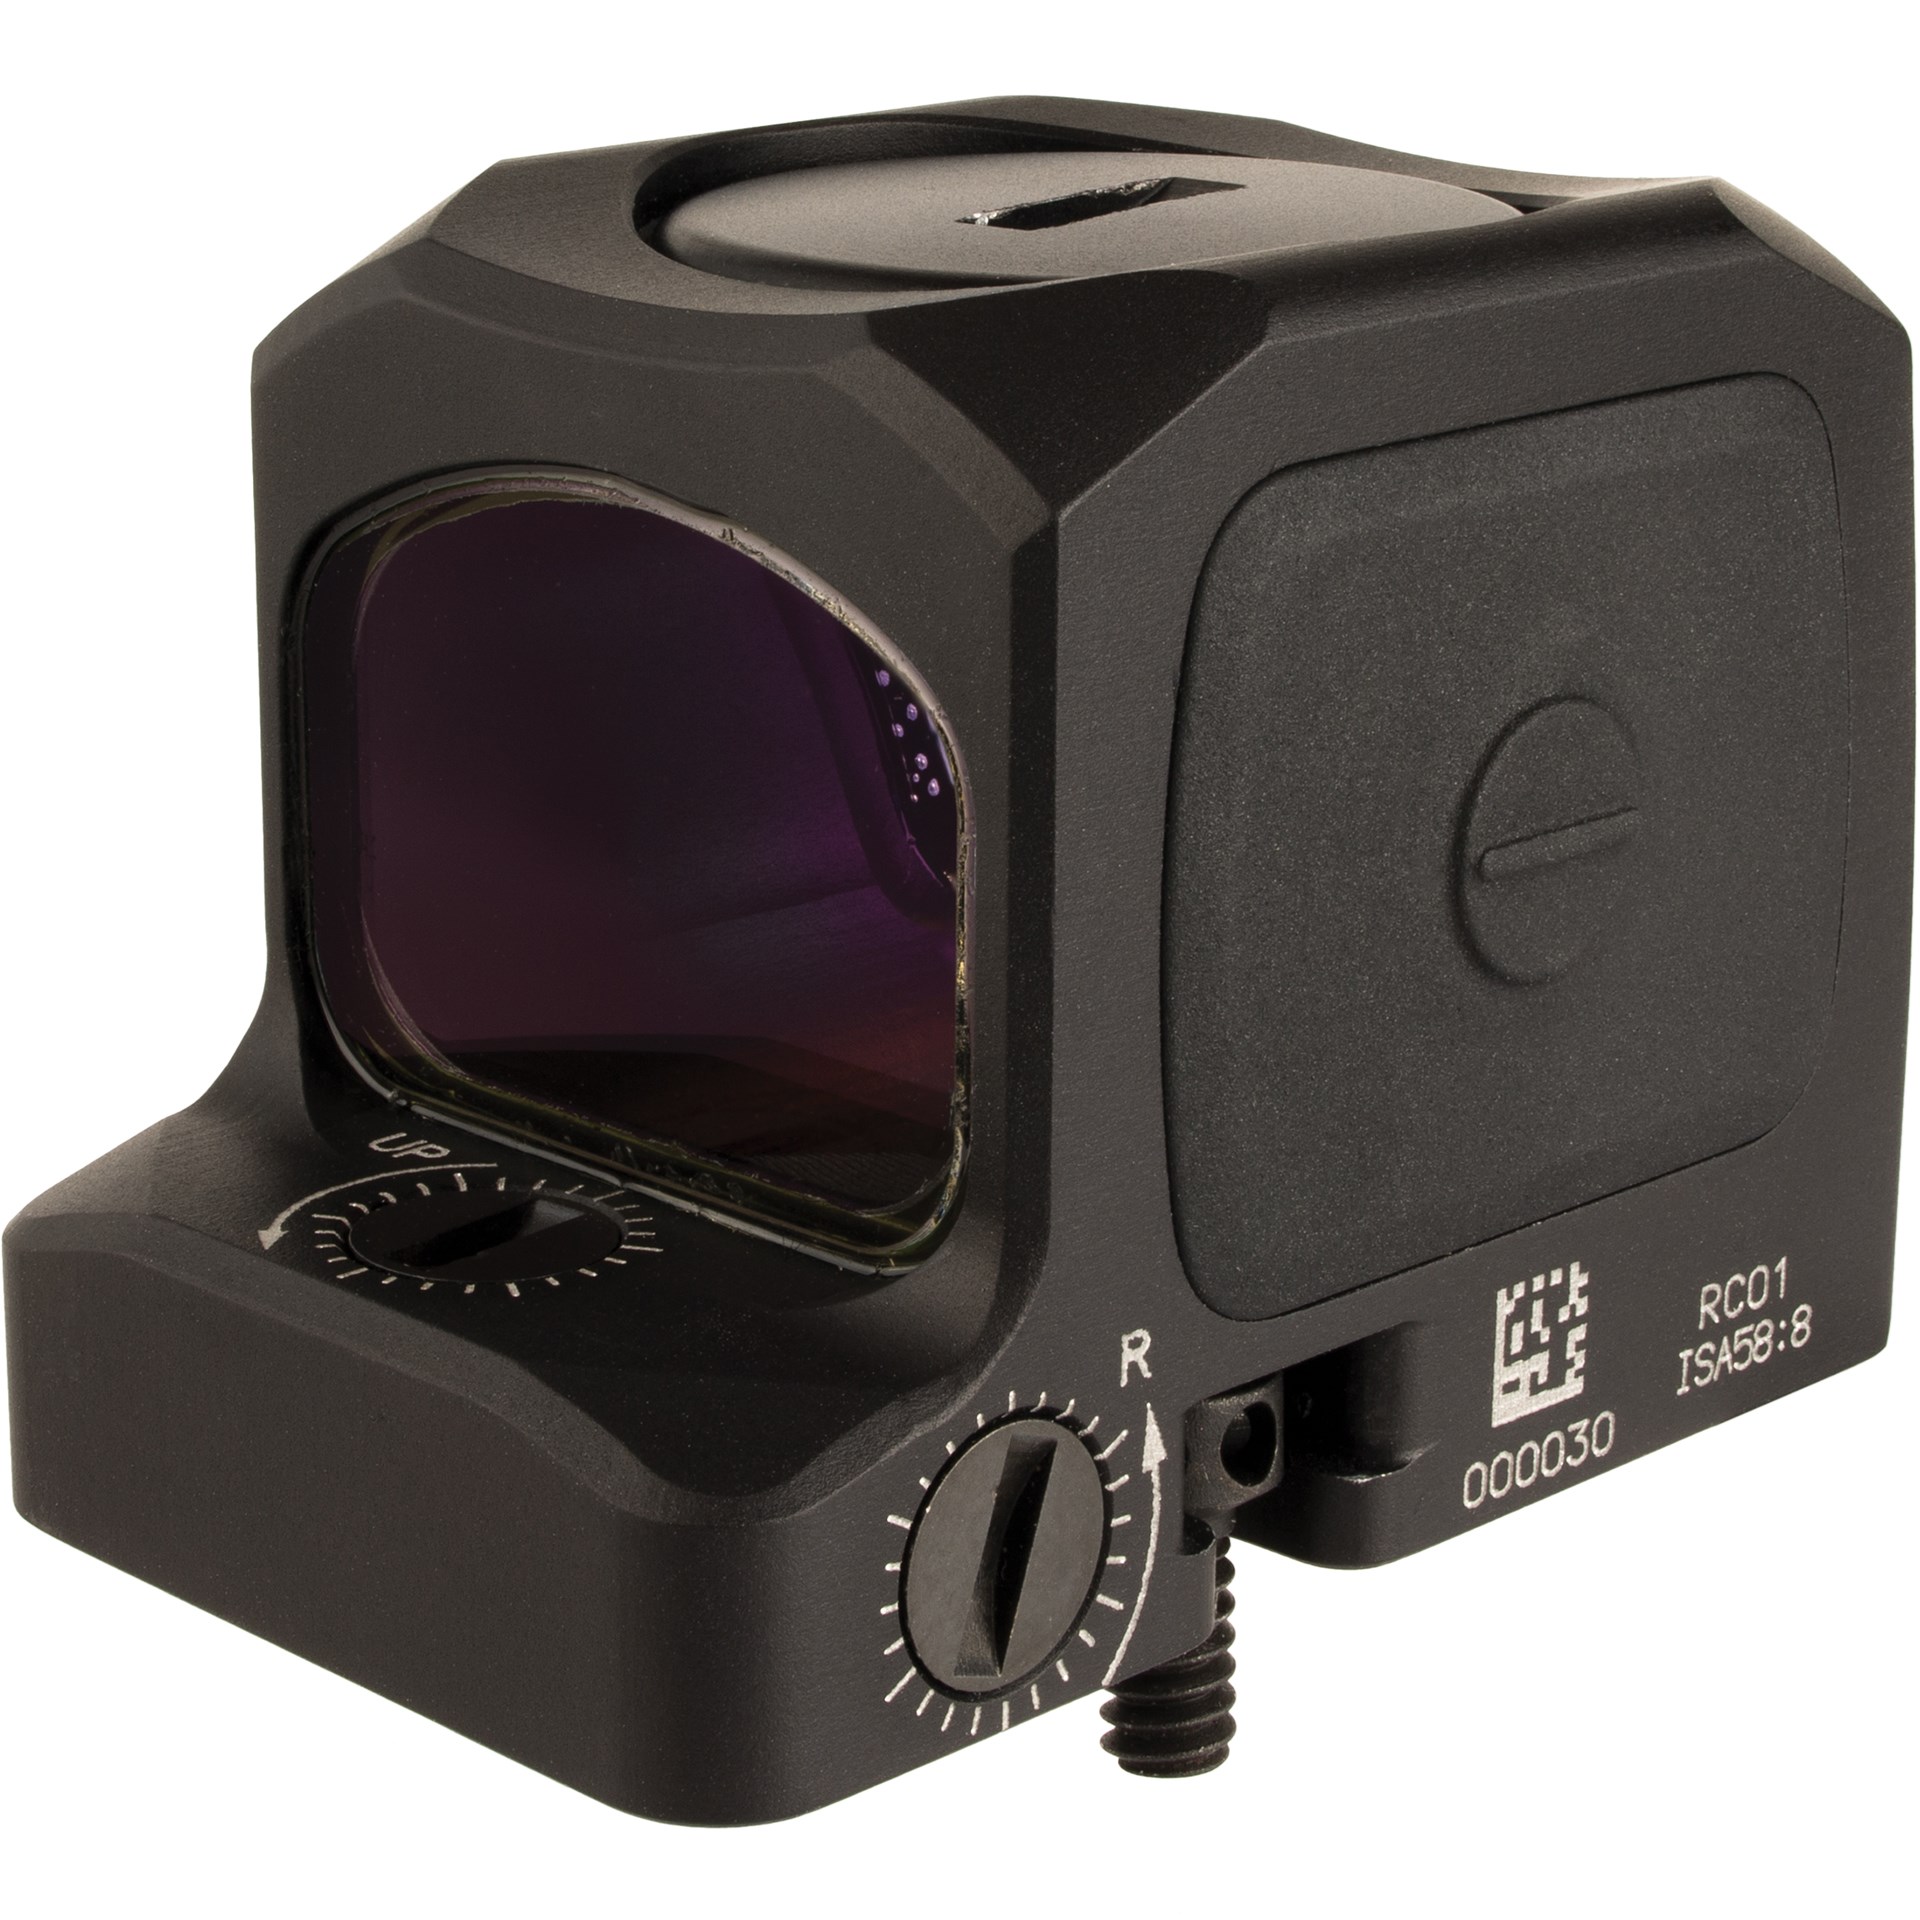 Trijicon RCR enclosed emitter red-dot reflex optic black square housing minus button battery cover on top